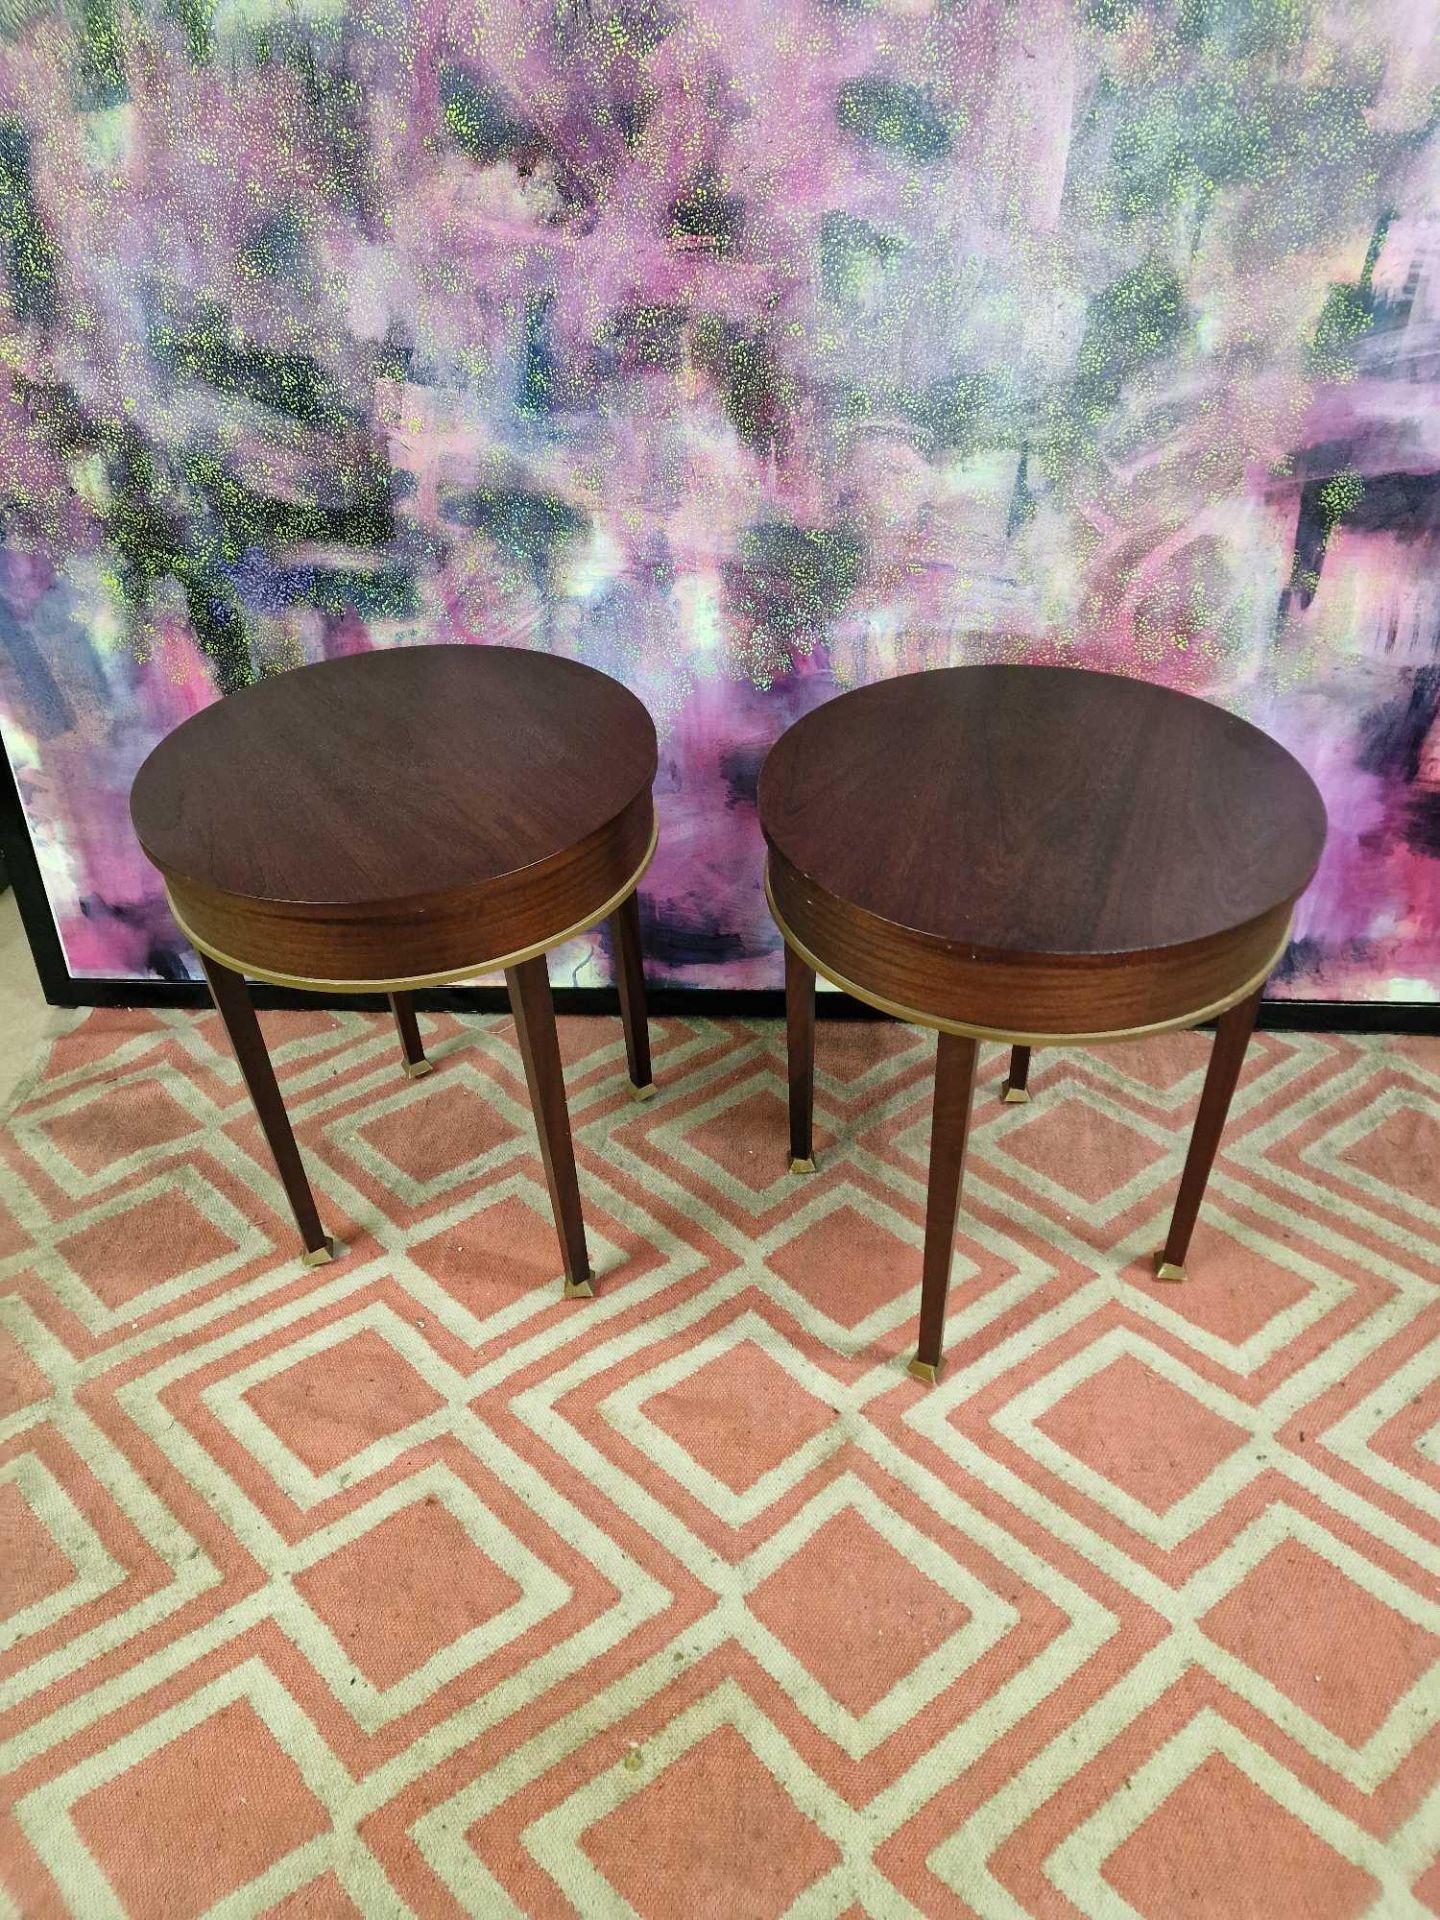 A Pair Of Mahogany Drum Side Tables With Circular Tops 55cm In Diameter With Brass Trim Details On - Image 3 of 3